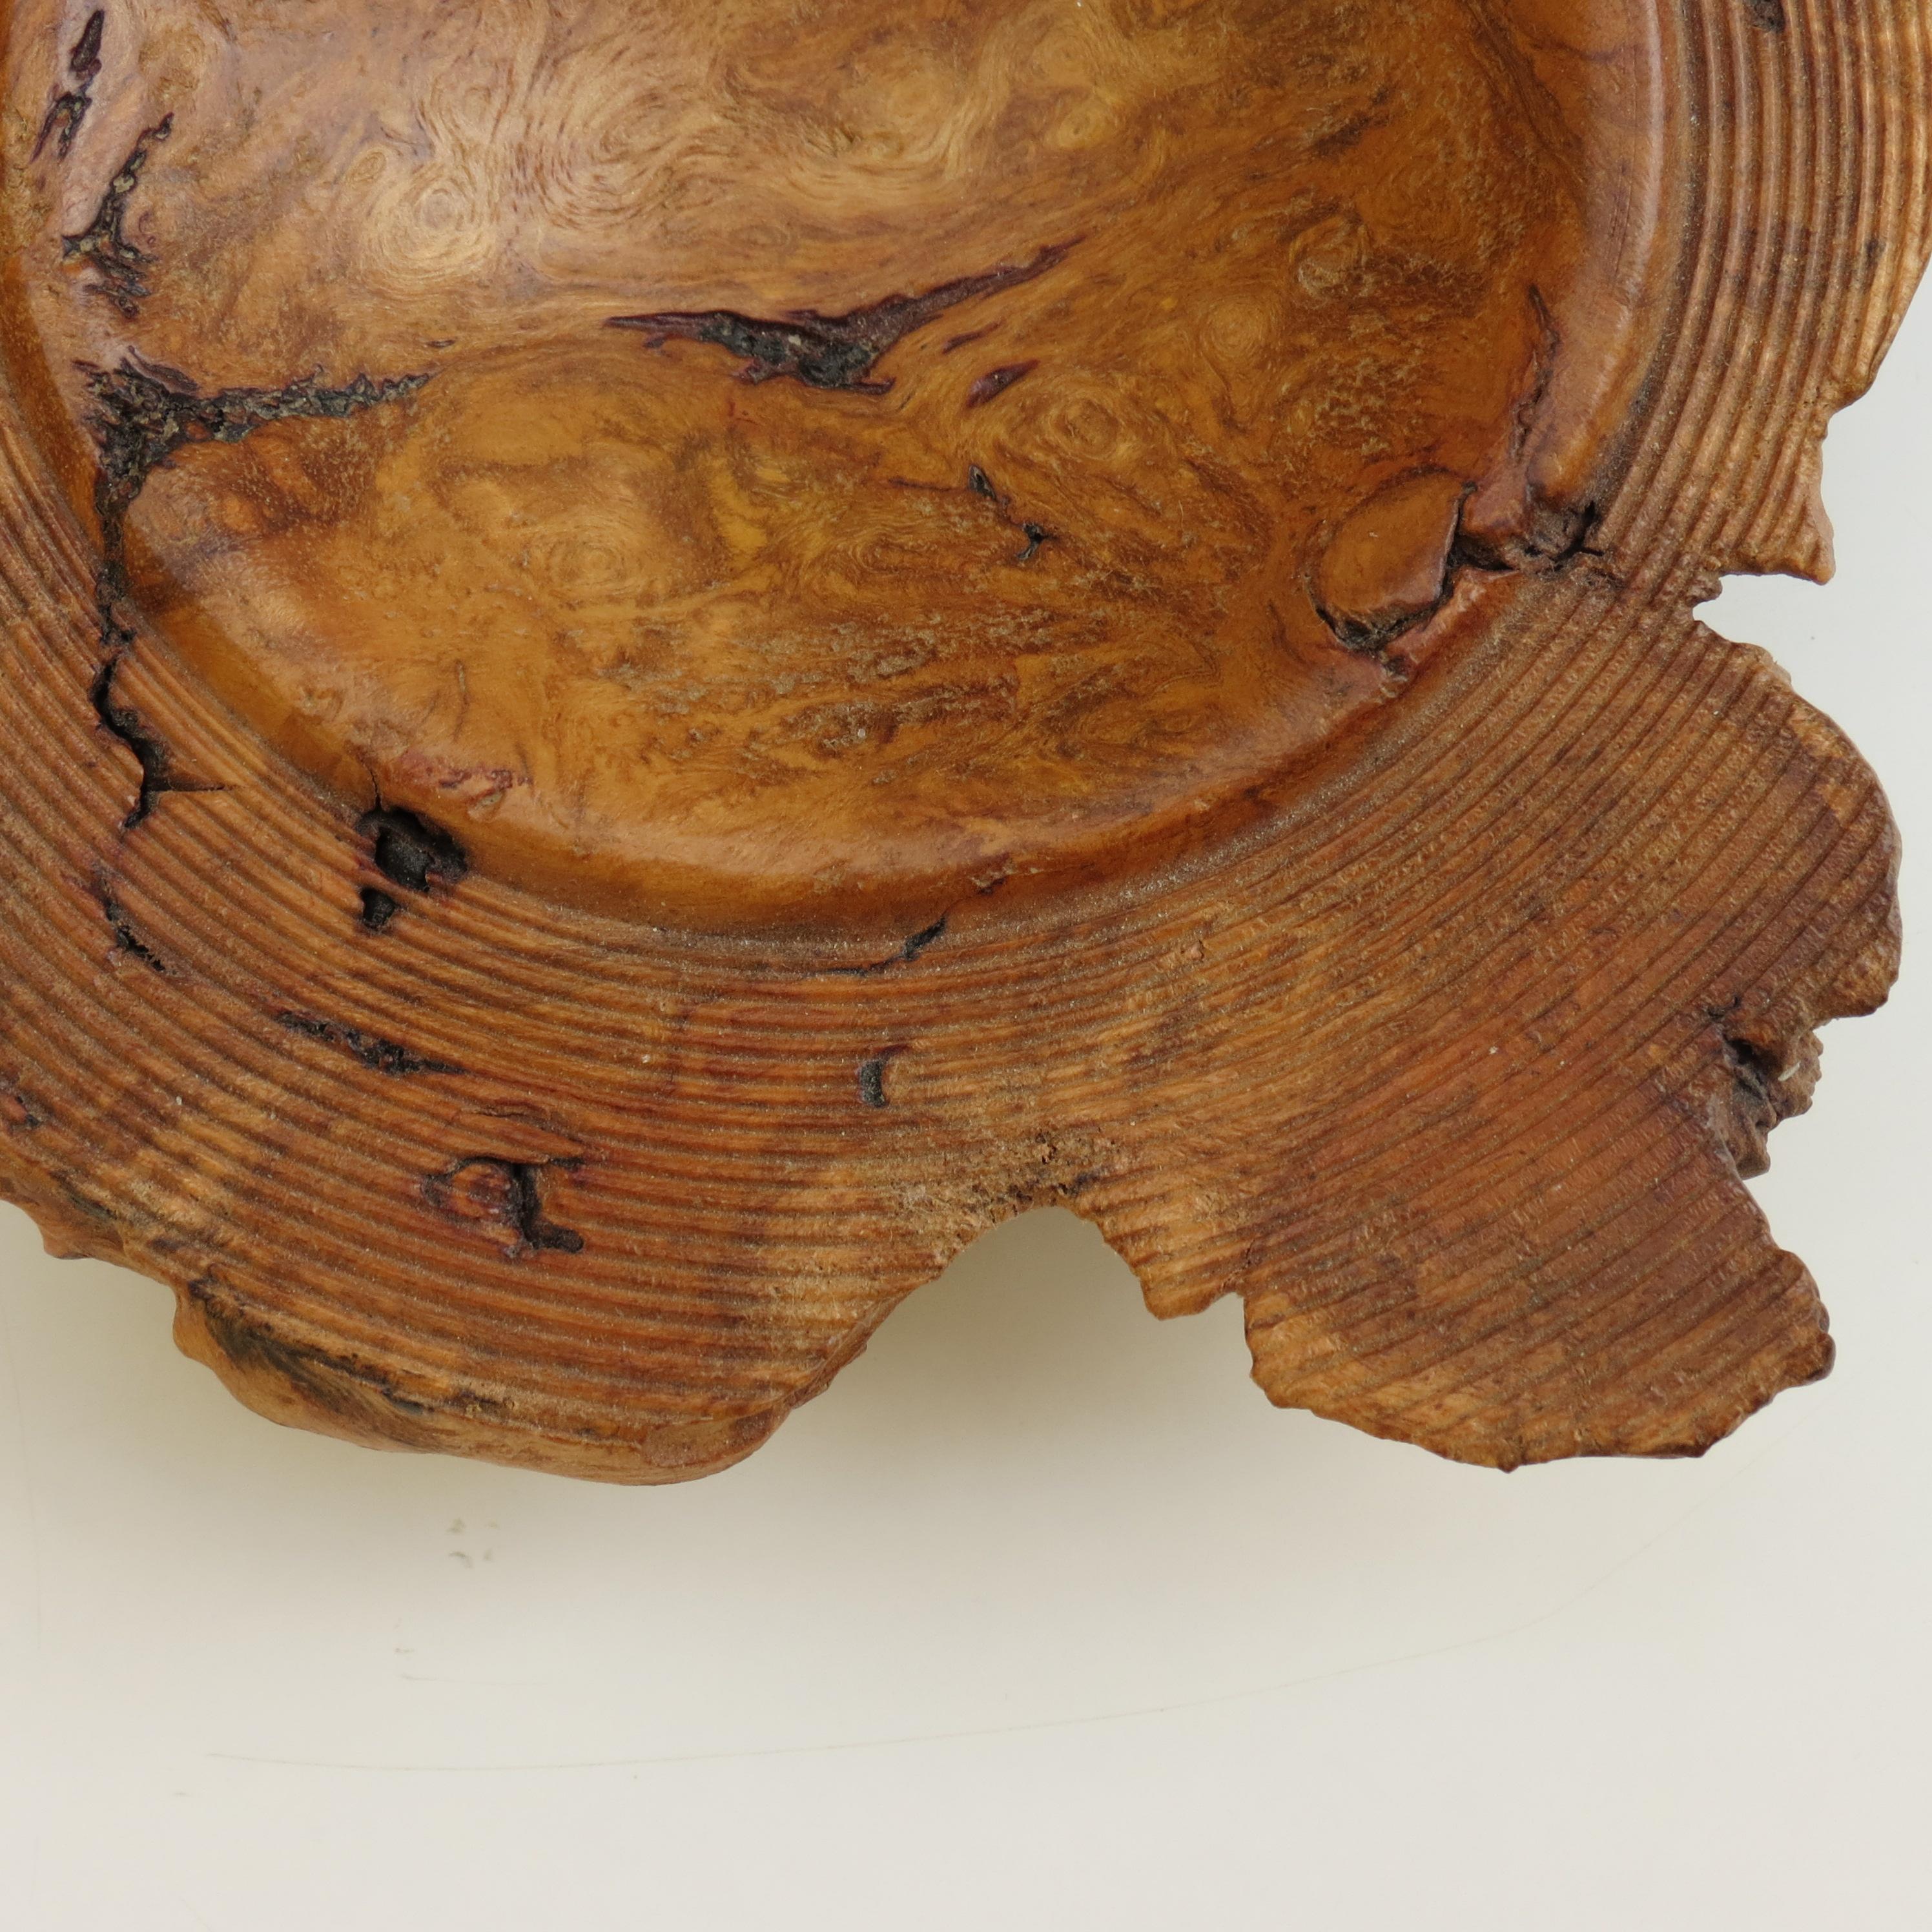 Hand-Crafted Naturalistic Burr Elm Hand Turned Bowl by Mike Scott 'Chai'